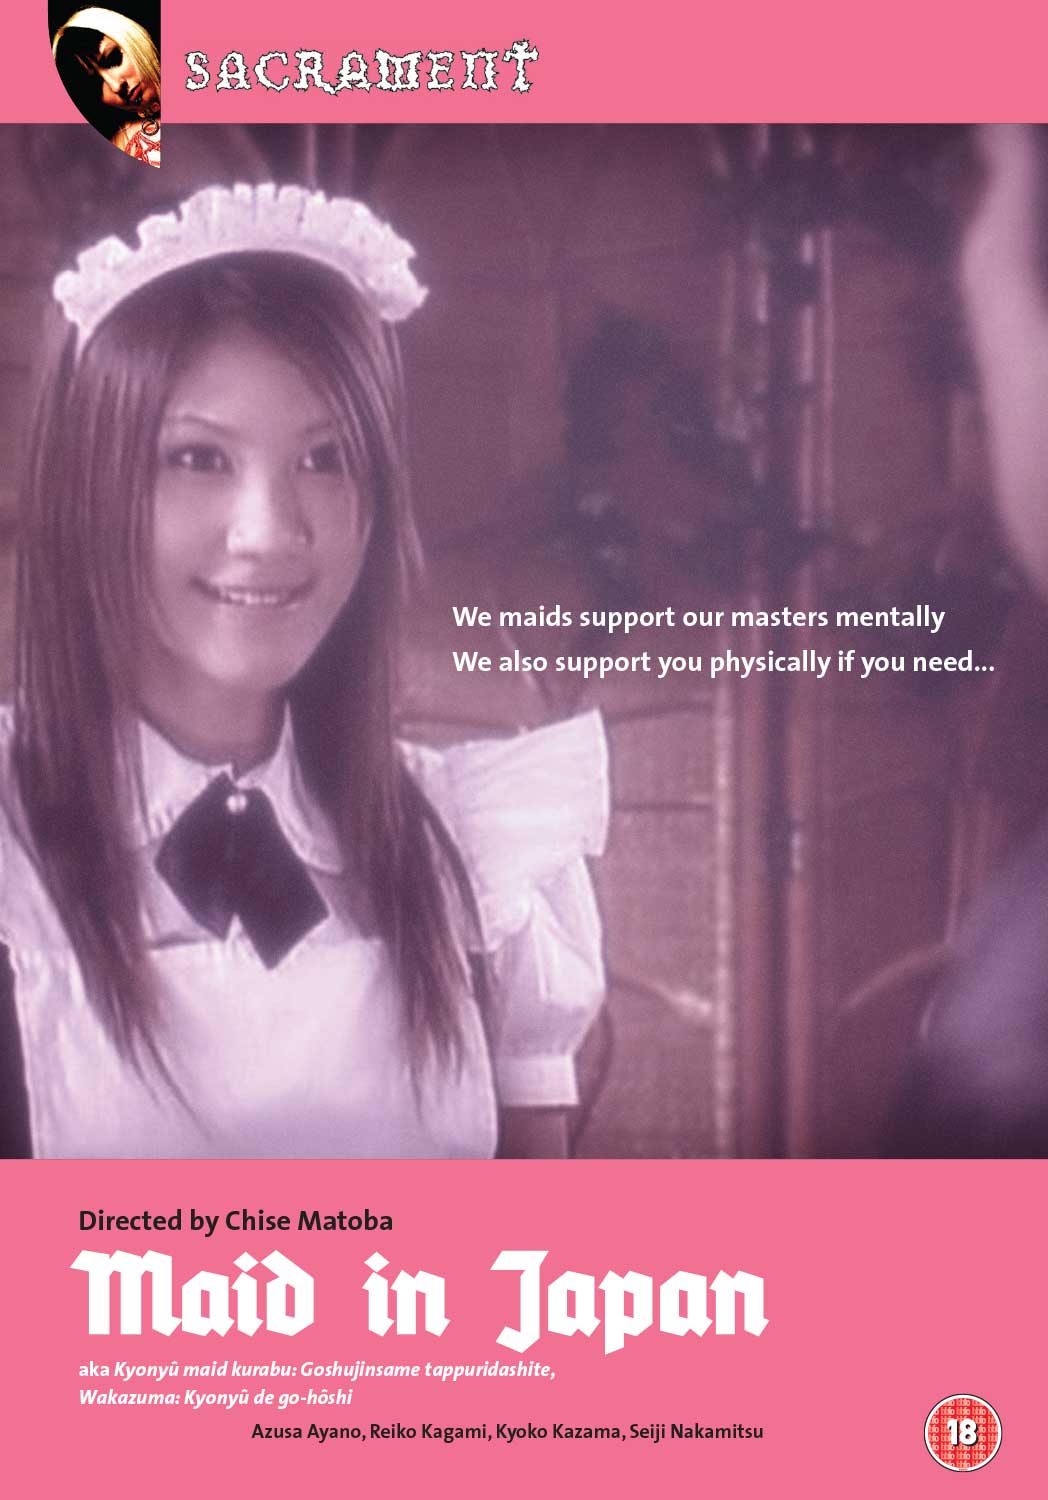 Directed by Sachi Hamano, as Chise Matoba, this pinku centres on Maid Culture or Meido